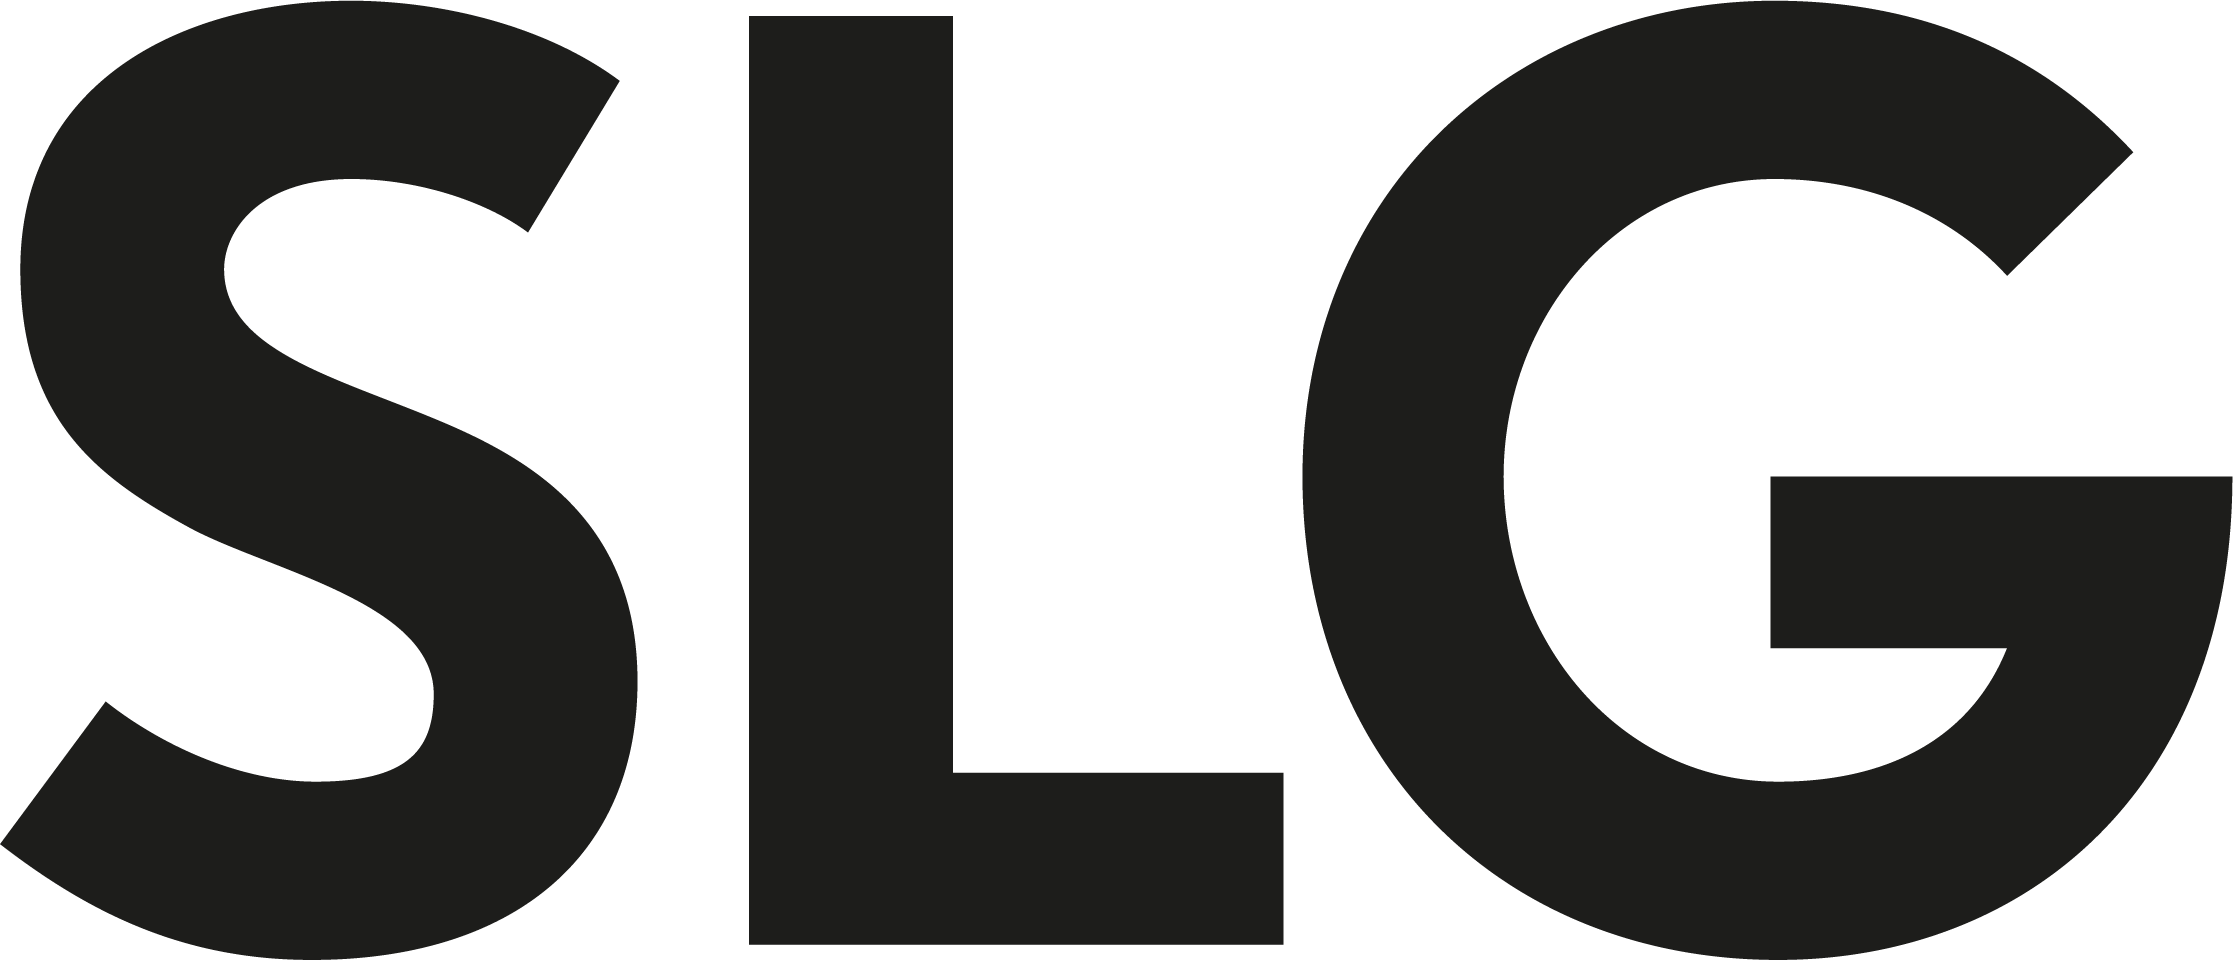 The South London Gallery's Logo in black and white 